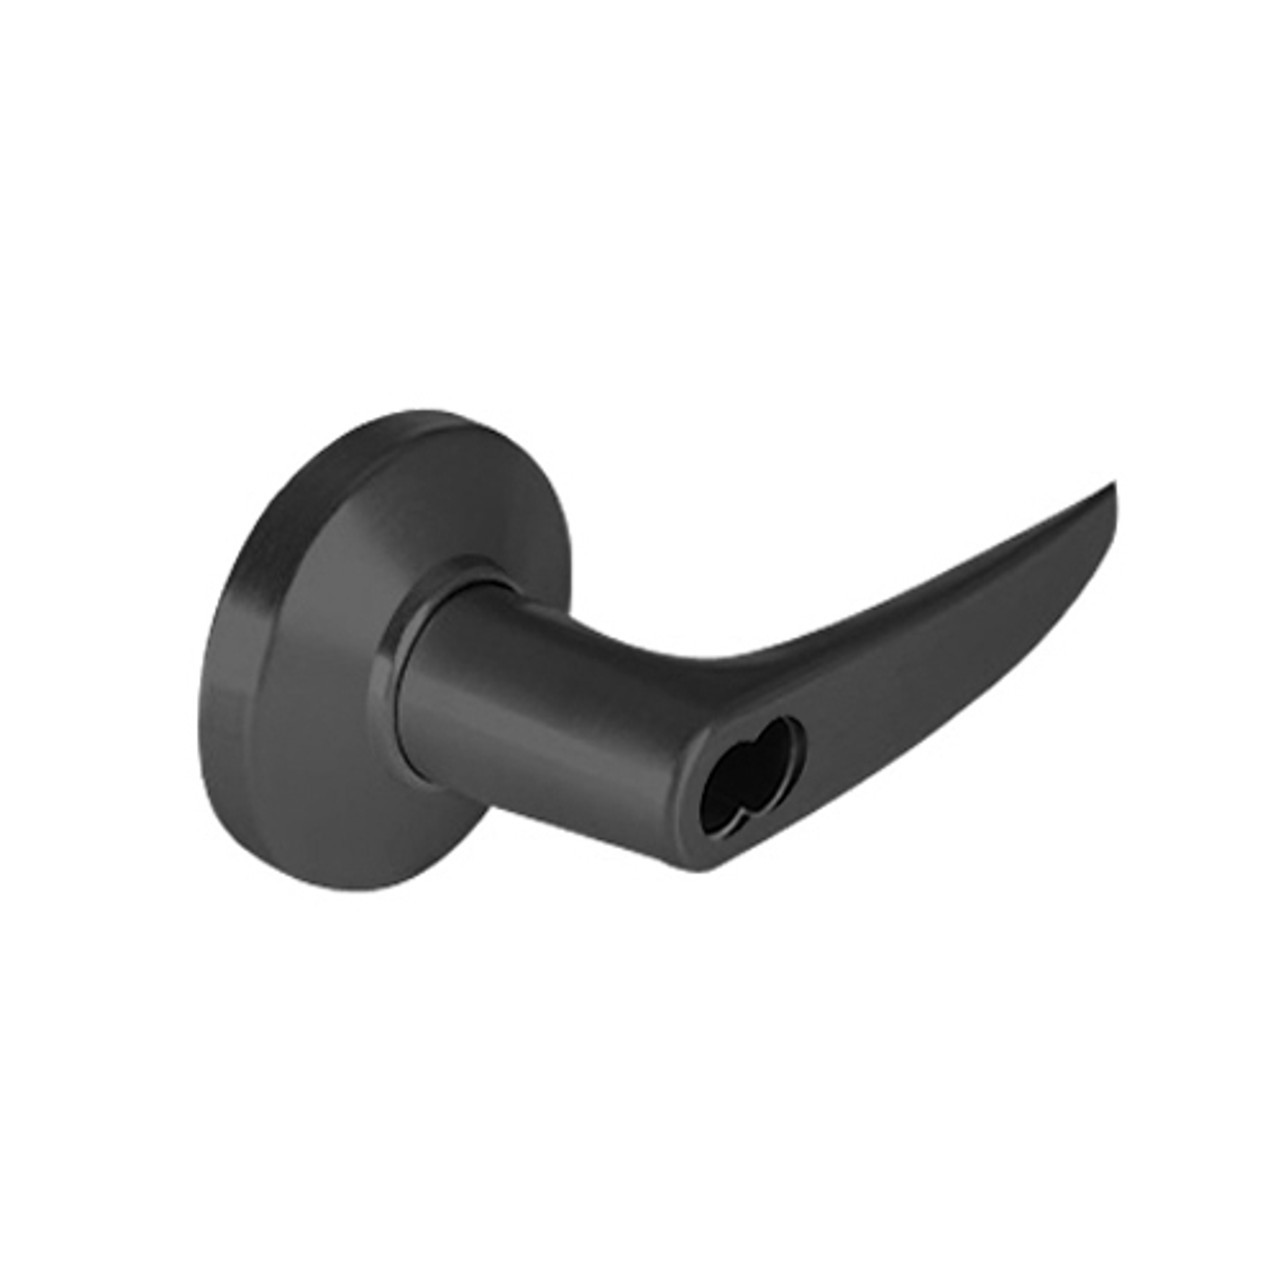 9K47A16CSTK622LM Best 9K Series Dormitory or Storeroom Cylindrical Lever Locks with Curved without Return Lever Design Accept 7 Pin Best Core in Black